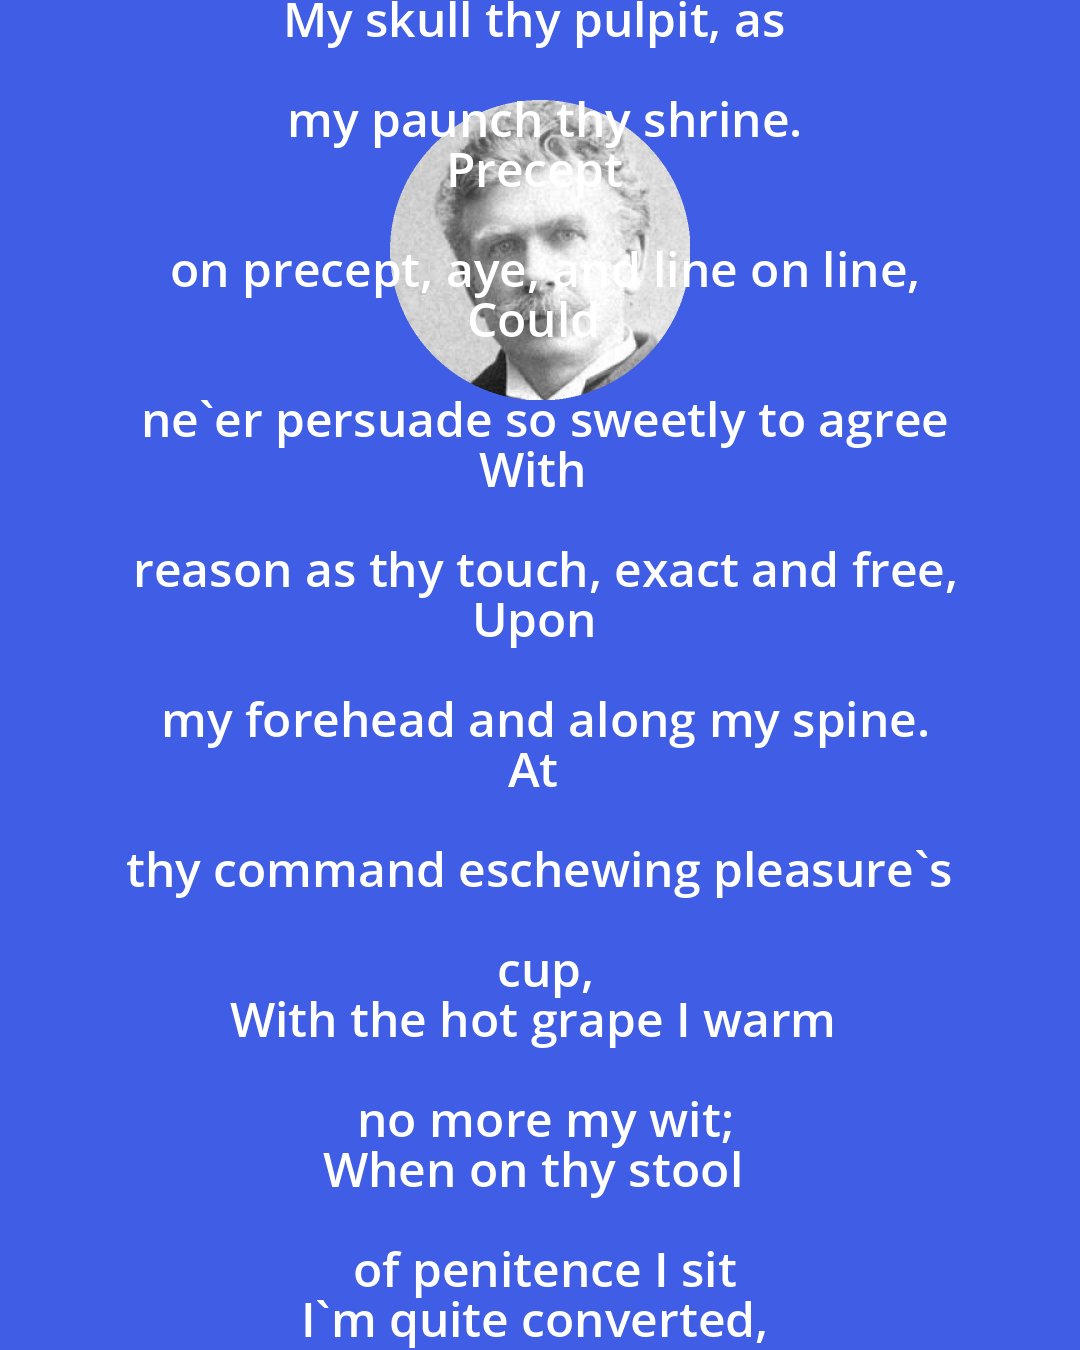 Ambrose Bierce: Hail, high Excess especially in wine,
To thee in worship do I bend the knee
Who preach abstemiousness unto me
My skull thy pulpit, as my paunch thy shrine.
Precept on precept, aye, and line on line,
Could ne'er persuade so sweetly to agree
With reason as thy touch, exact and free,
Upon my forehead and along my spine.
At thy command eschewing pleasure's cup,
With the hot grape I warm no more my wit;
When on thy stool of penitence I sit
I'm quite converted, for I can't get up.
Ungrateful he who afterward would falter
To make new sacrifices at thine altar!